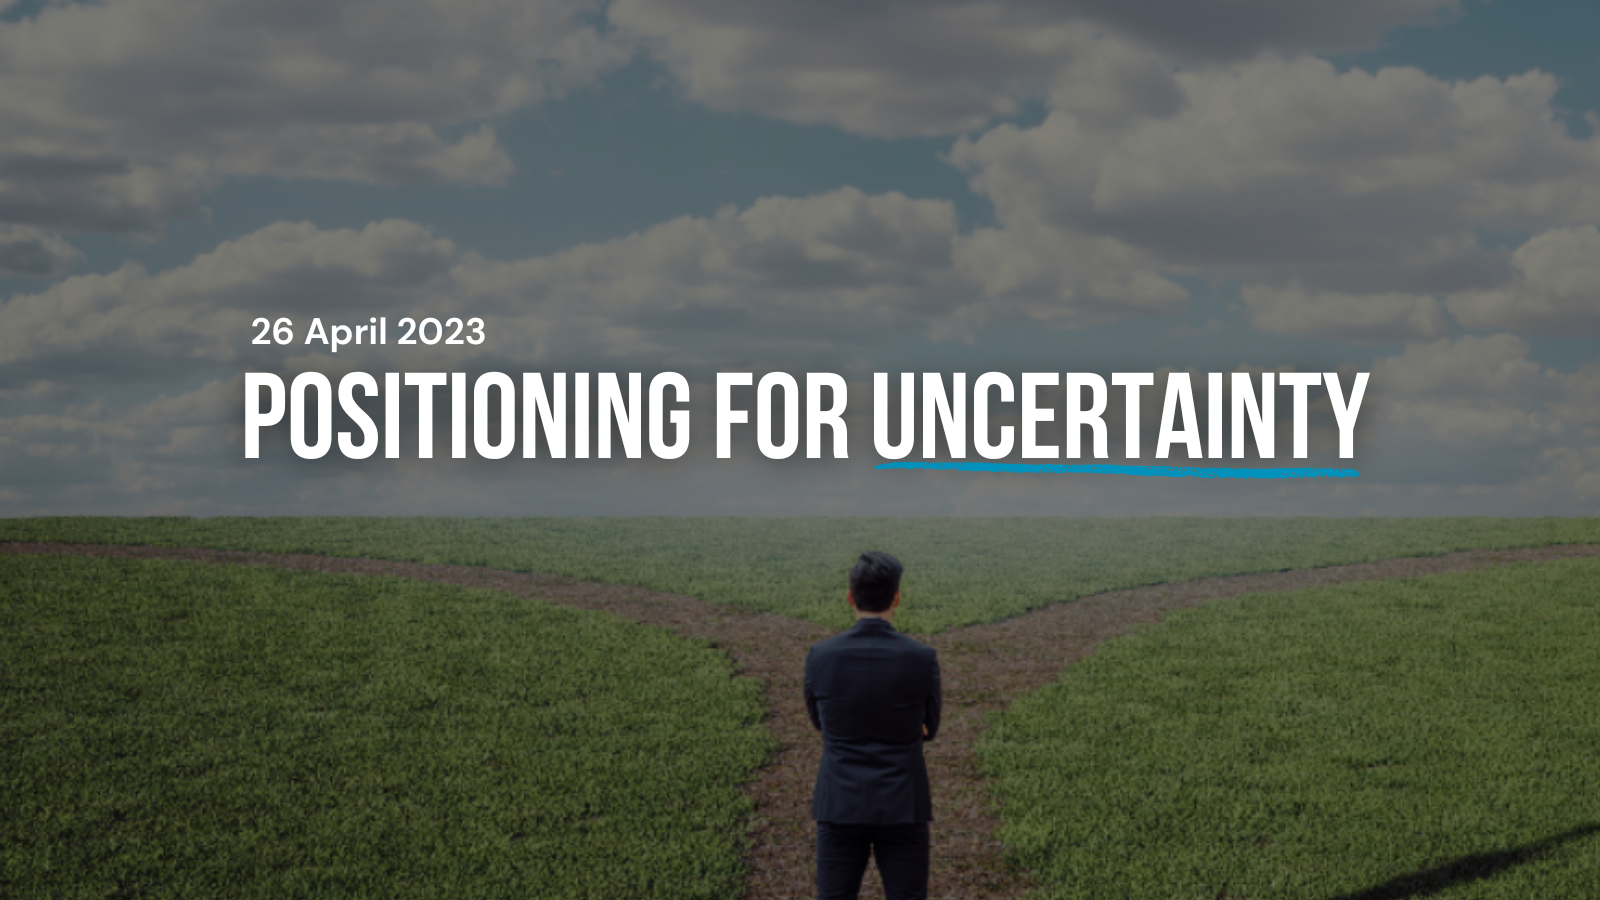 Positioning for uncertainty